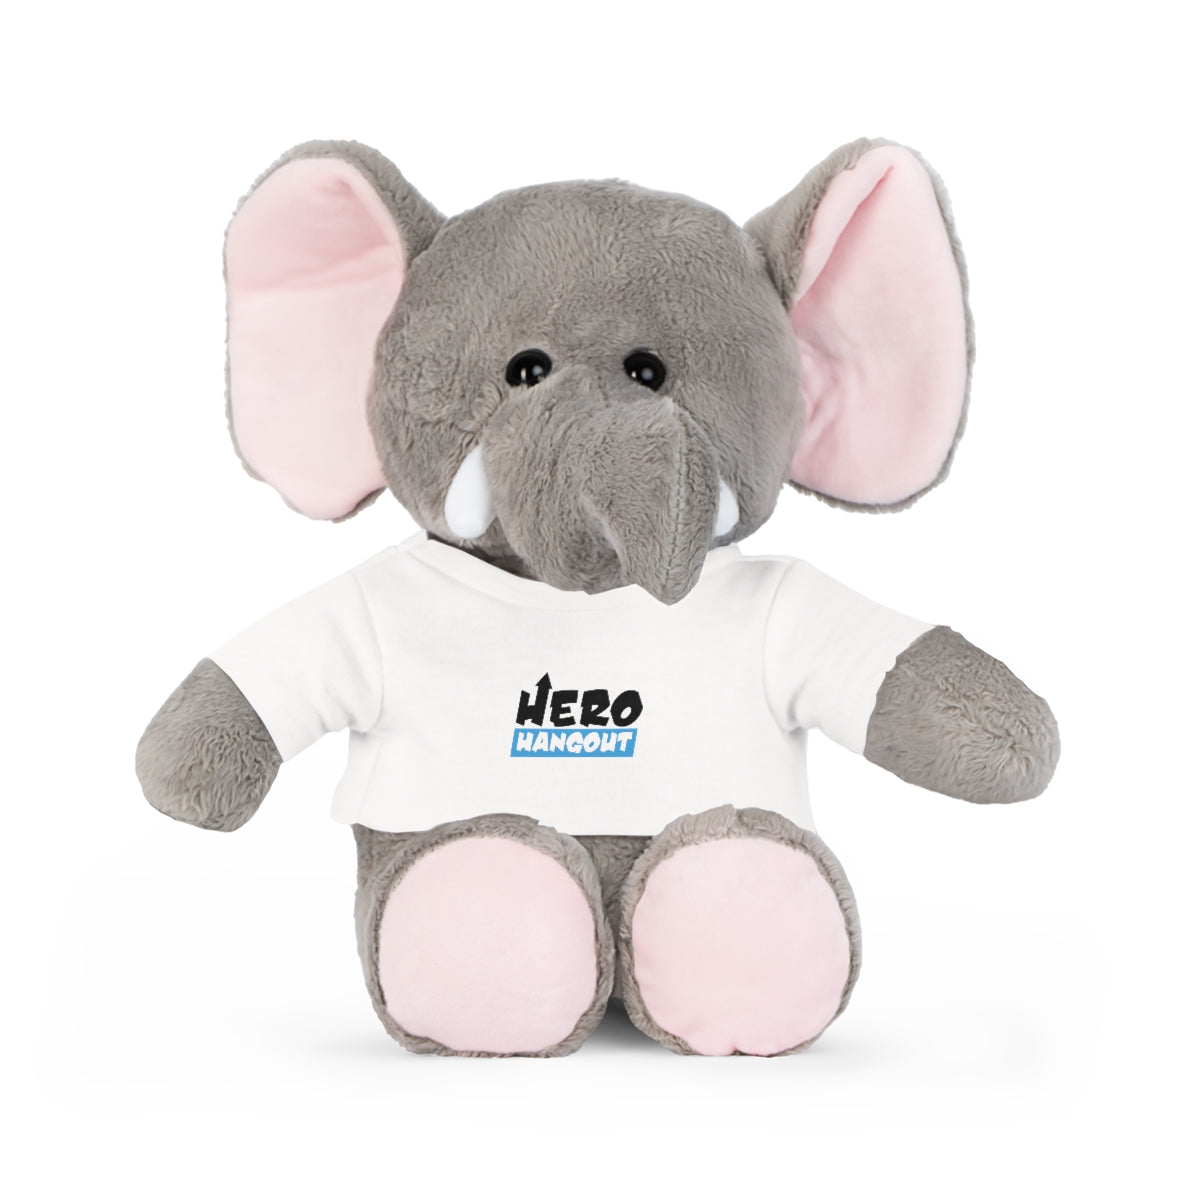 Plush Toy with HeroHangout T-Shirt